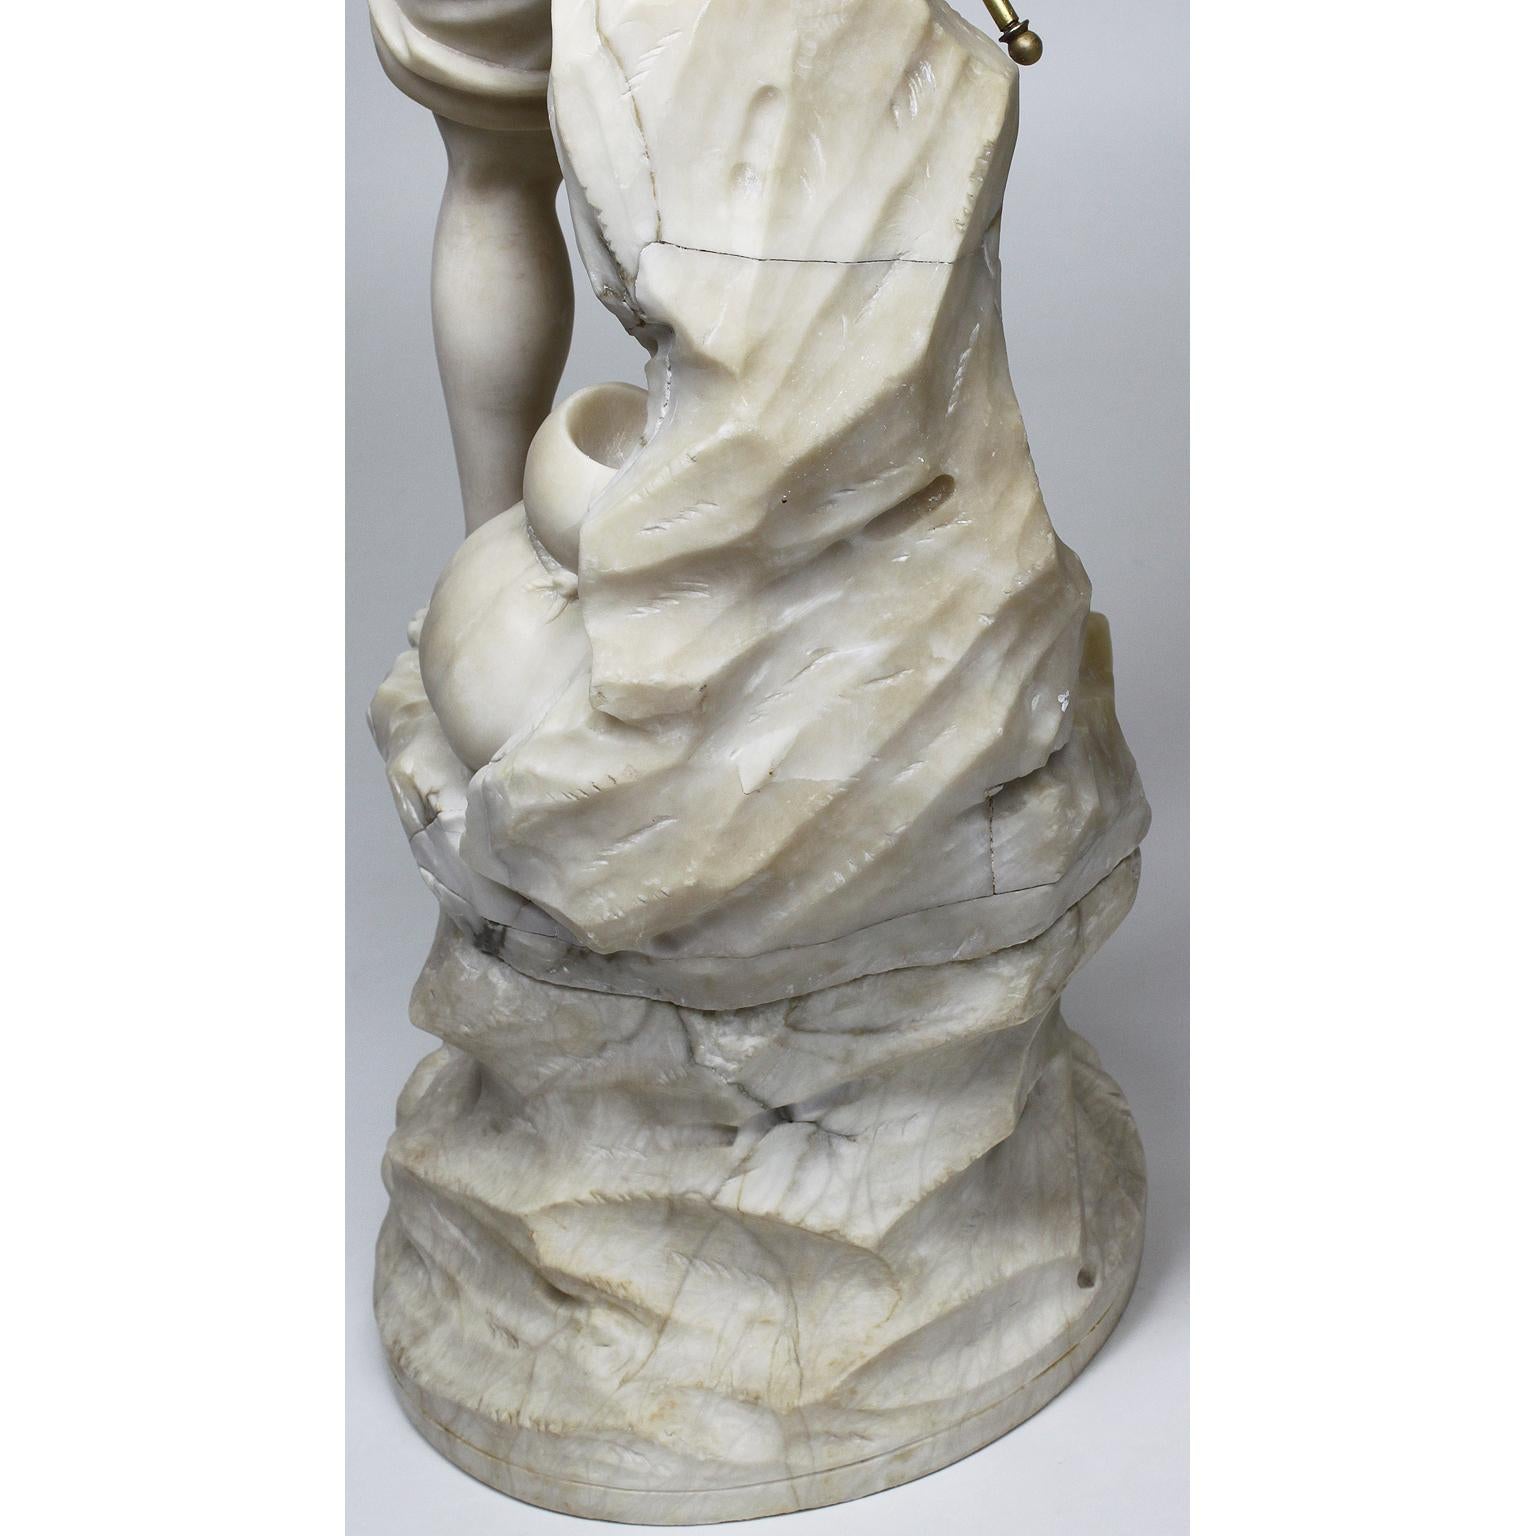 Charming Italian 19th-20th Century Carved Alabaster Figure of a Fisher Boy For Sale 8